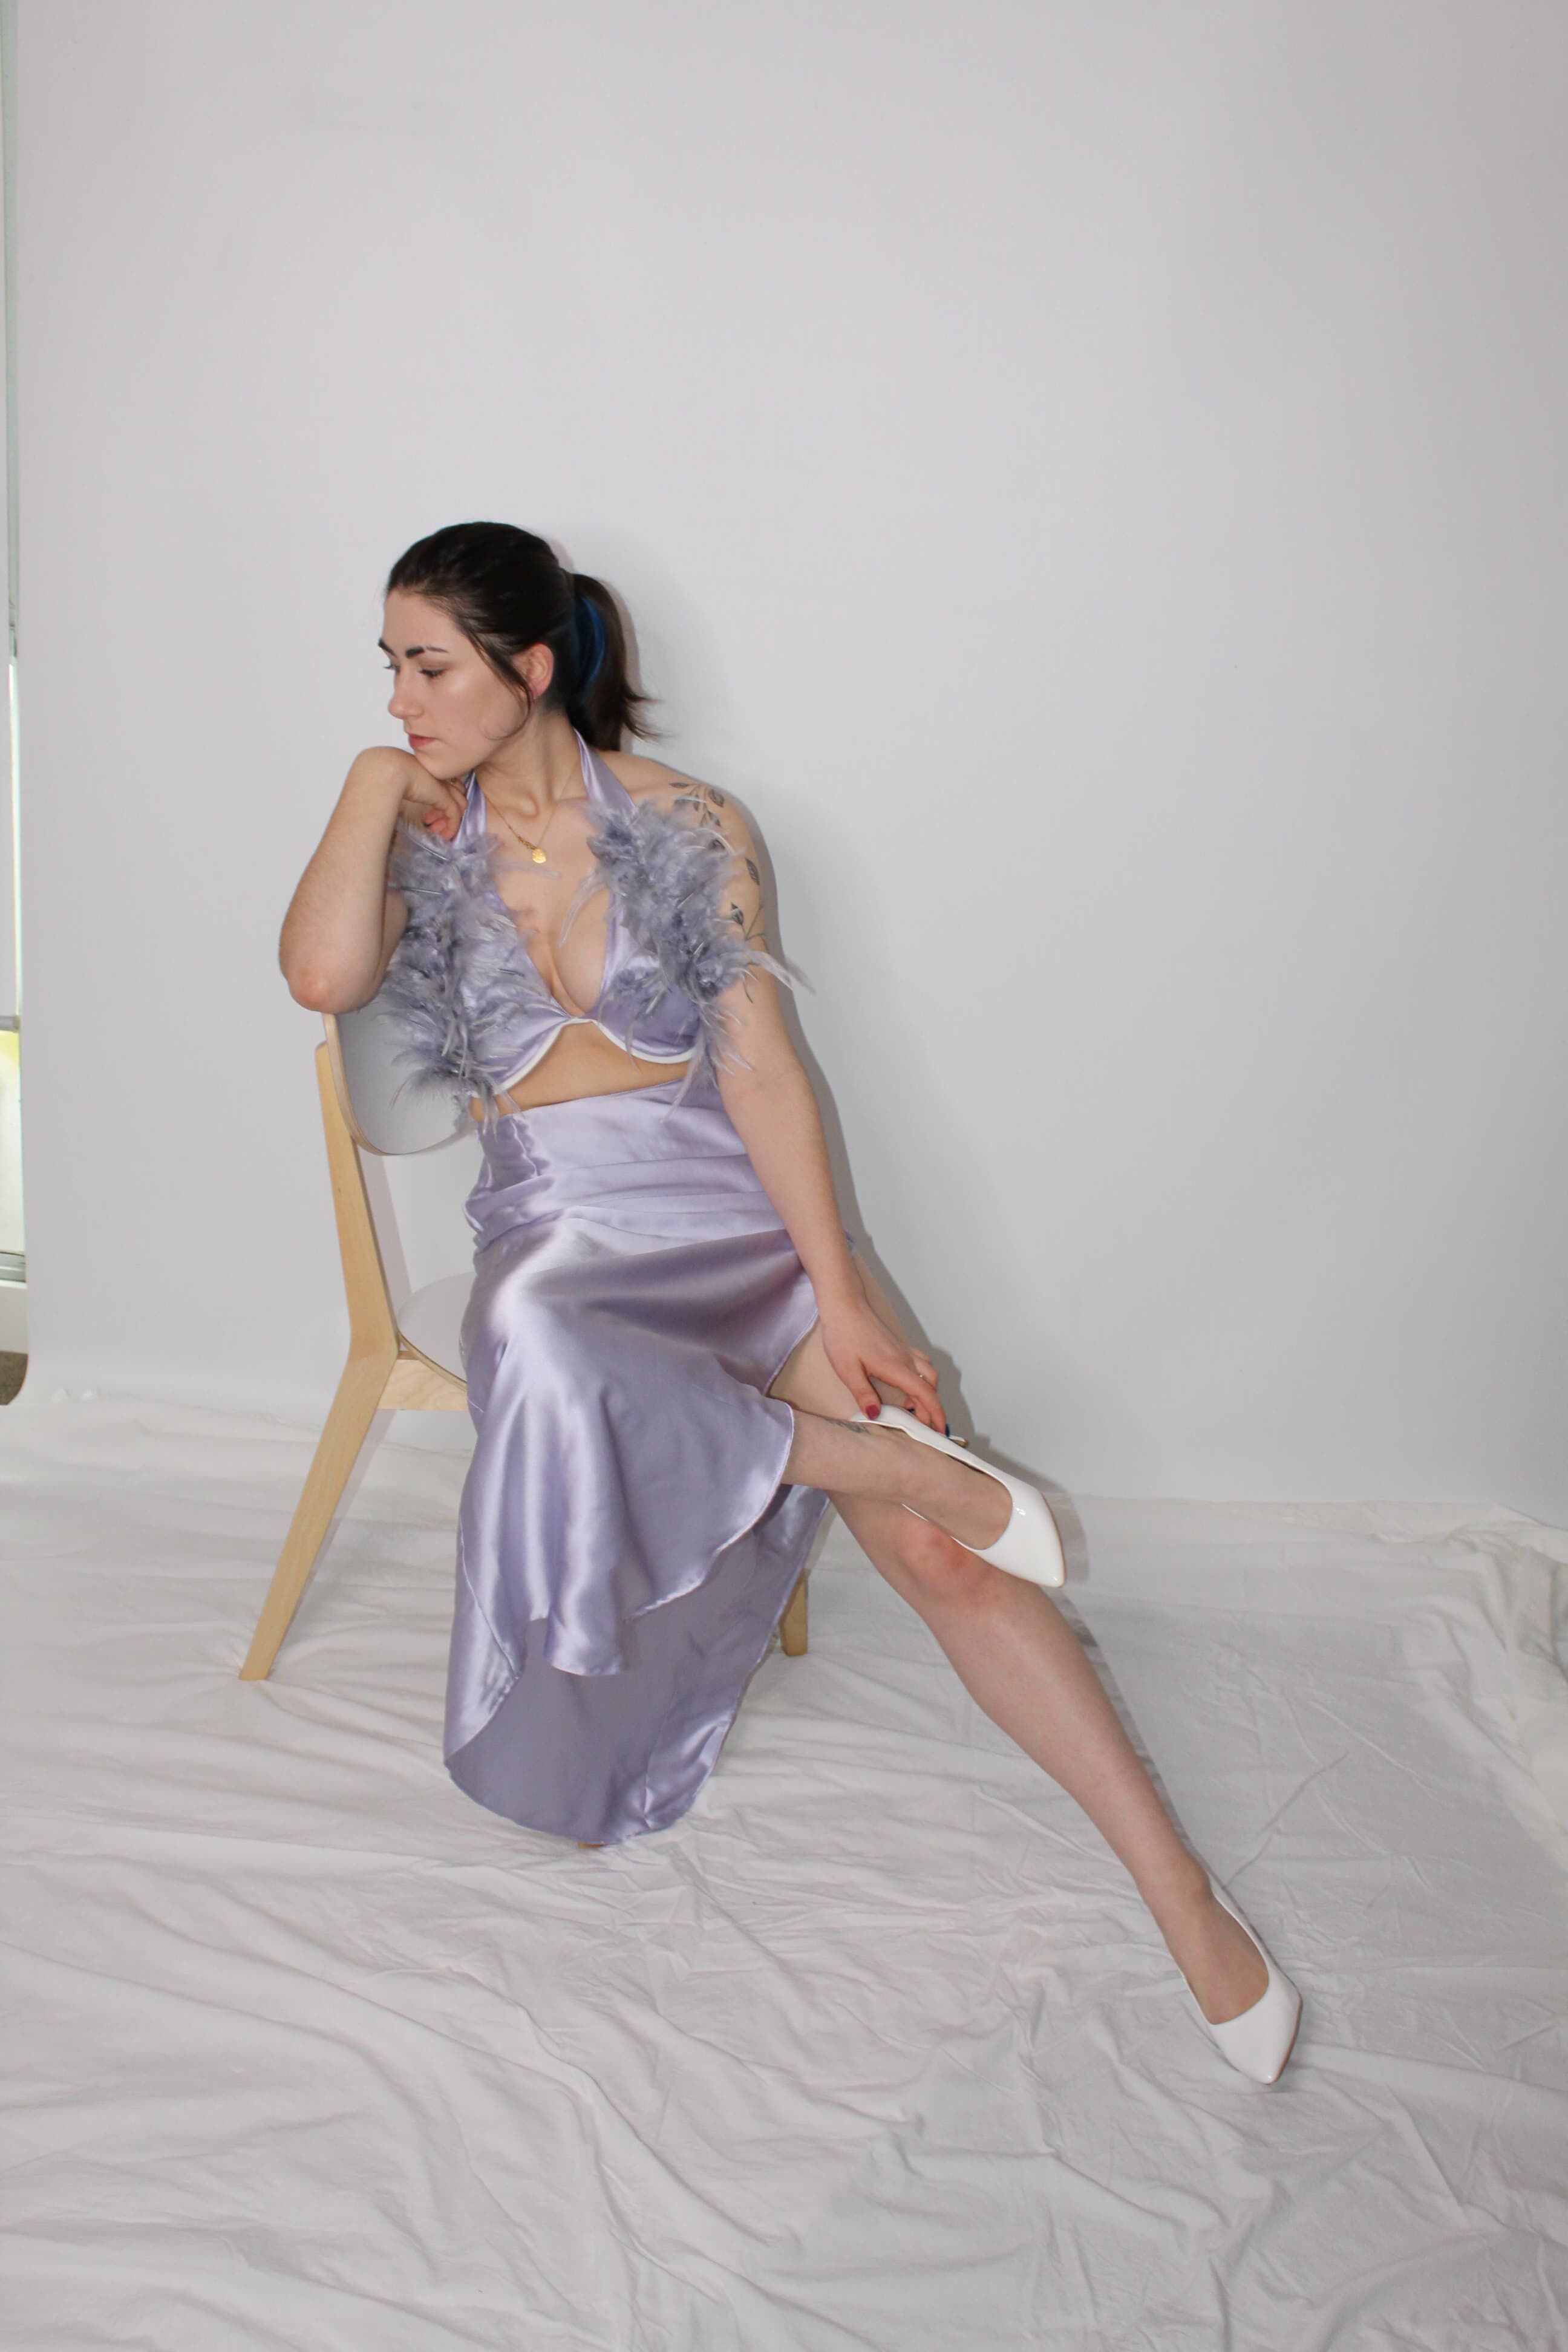 A woman seated on a wooden chair, donning a lavender dress with feather accents, adjusting her white heel against a plain backdrop.